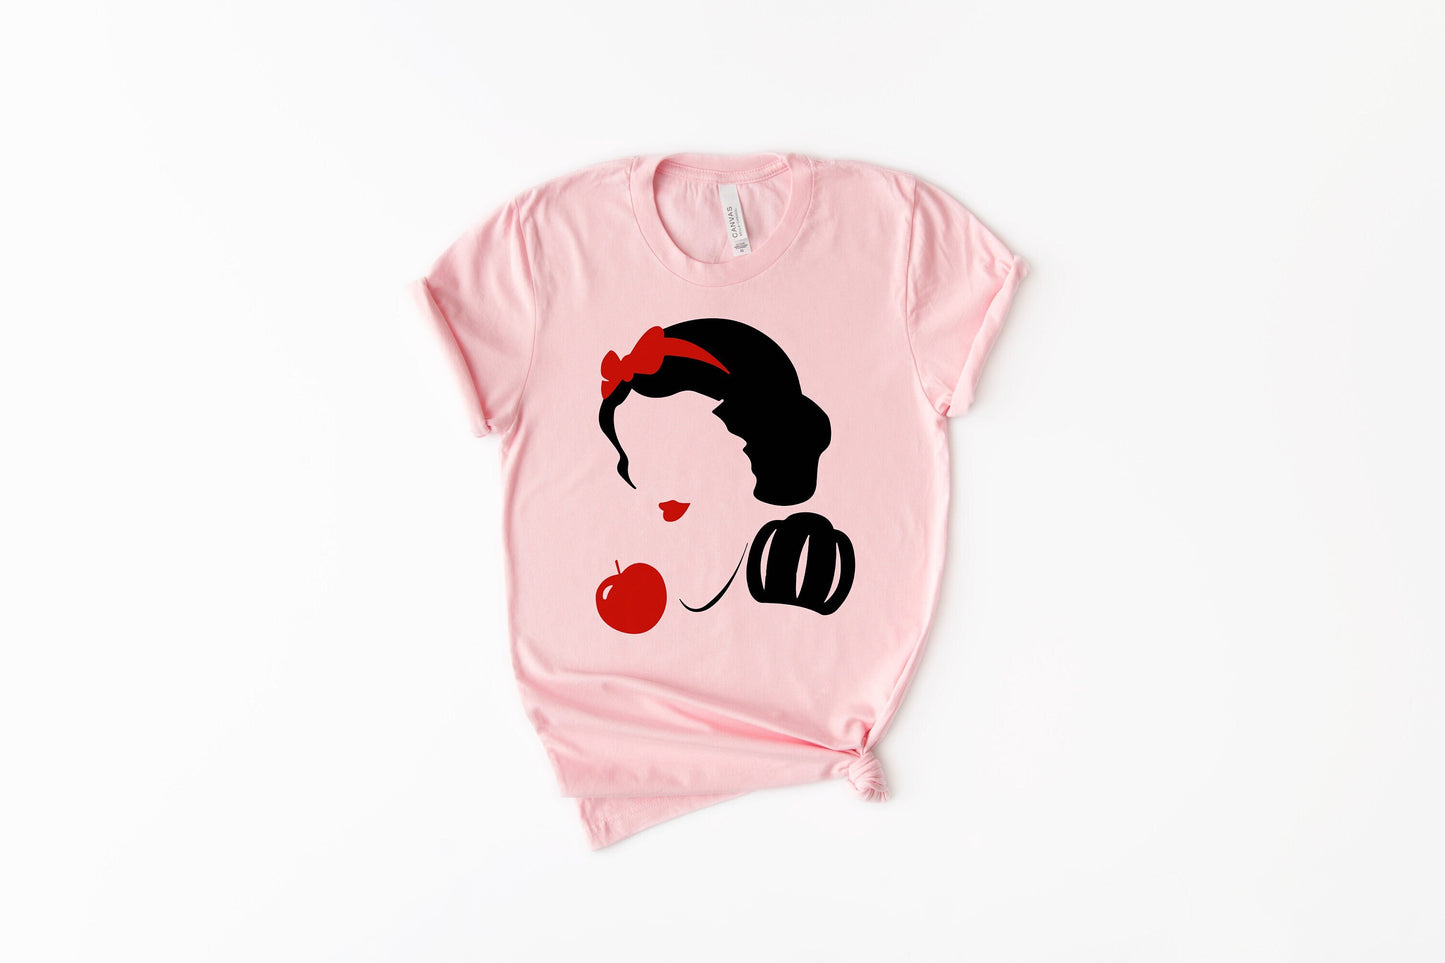 Snow White Princess Silhouette T-Shirt Ultra Soft Graphic Tee Unisex Soft Tee T-shirt for Women or Men